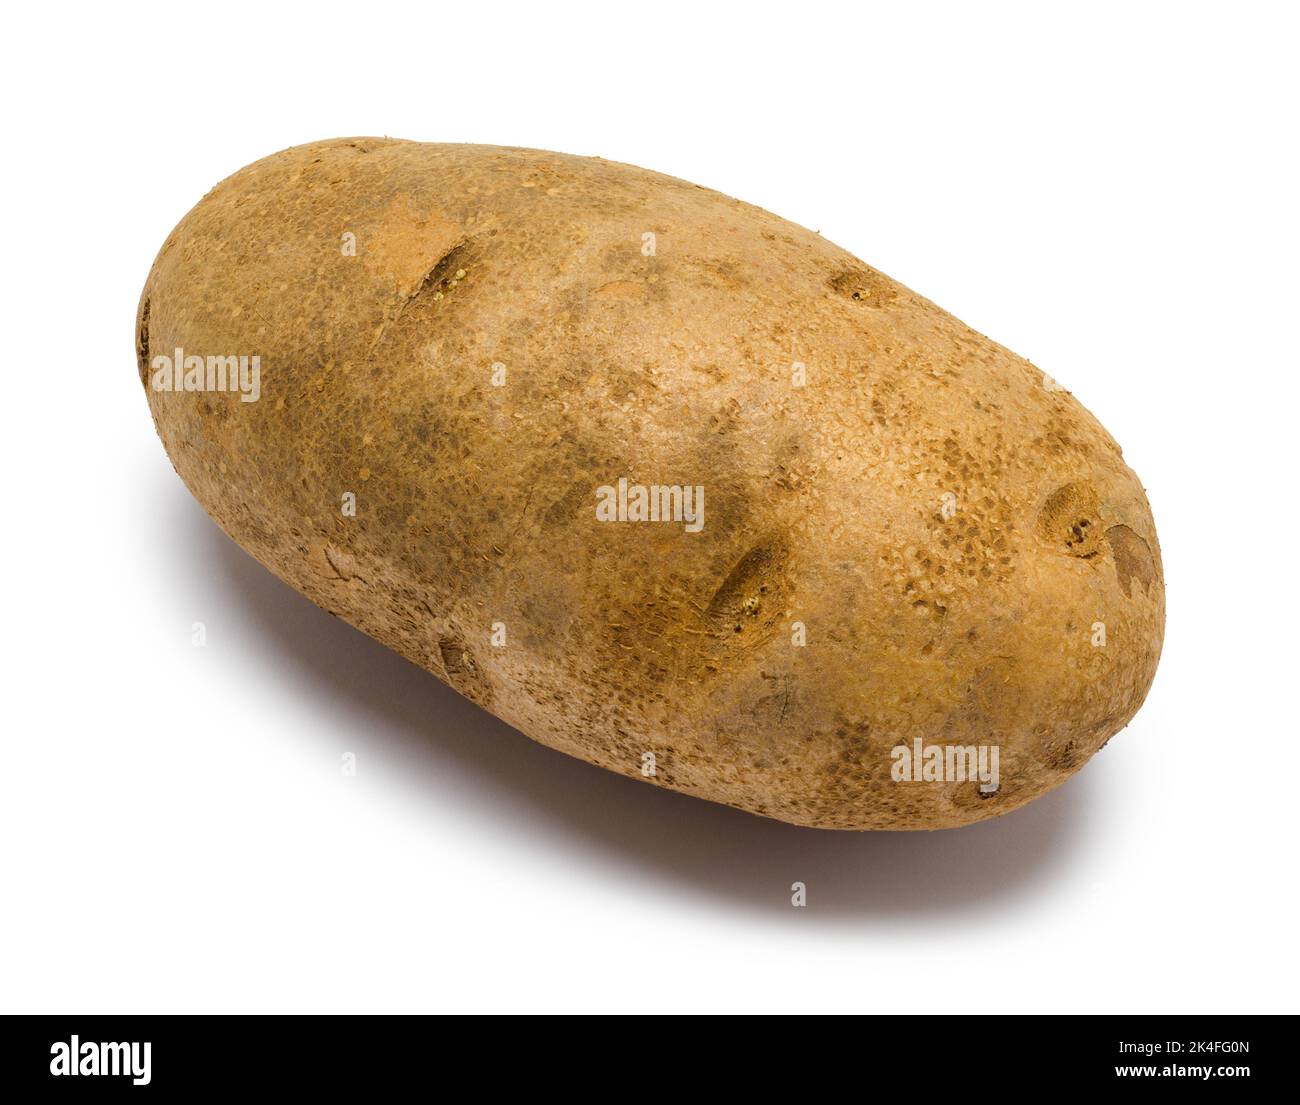 Large Russet Potato Cut Out on White. Stock Photo